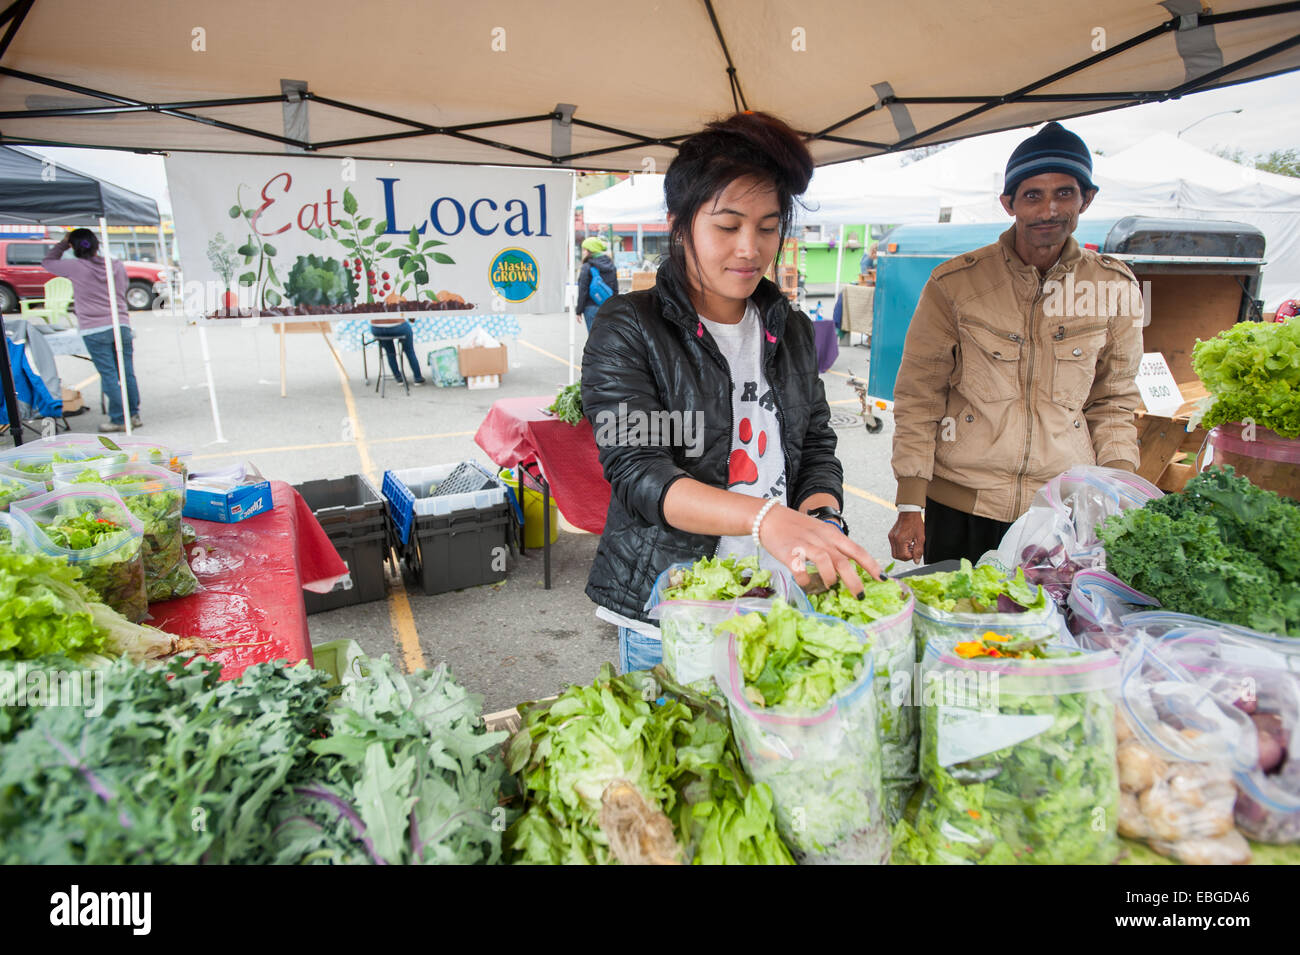 Woman selling vegetables at a farmers market Stock Photo